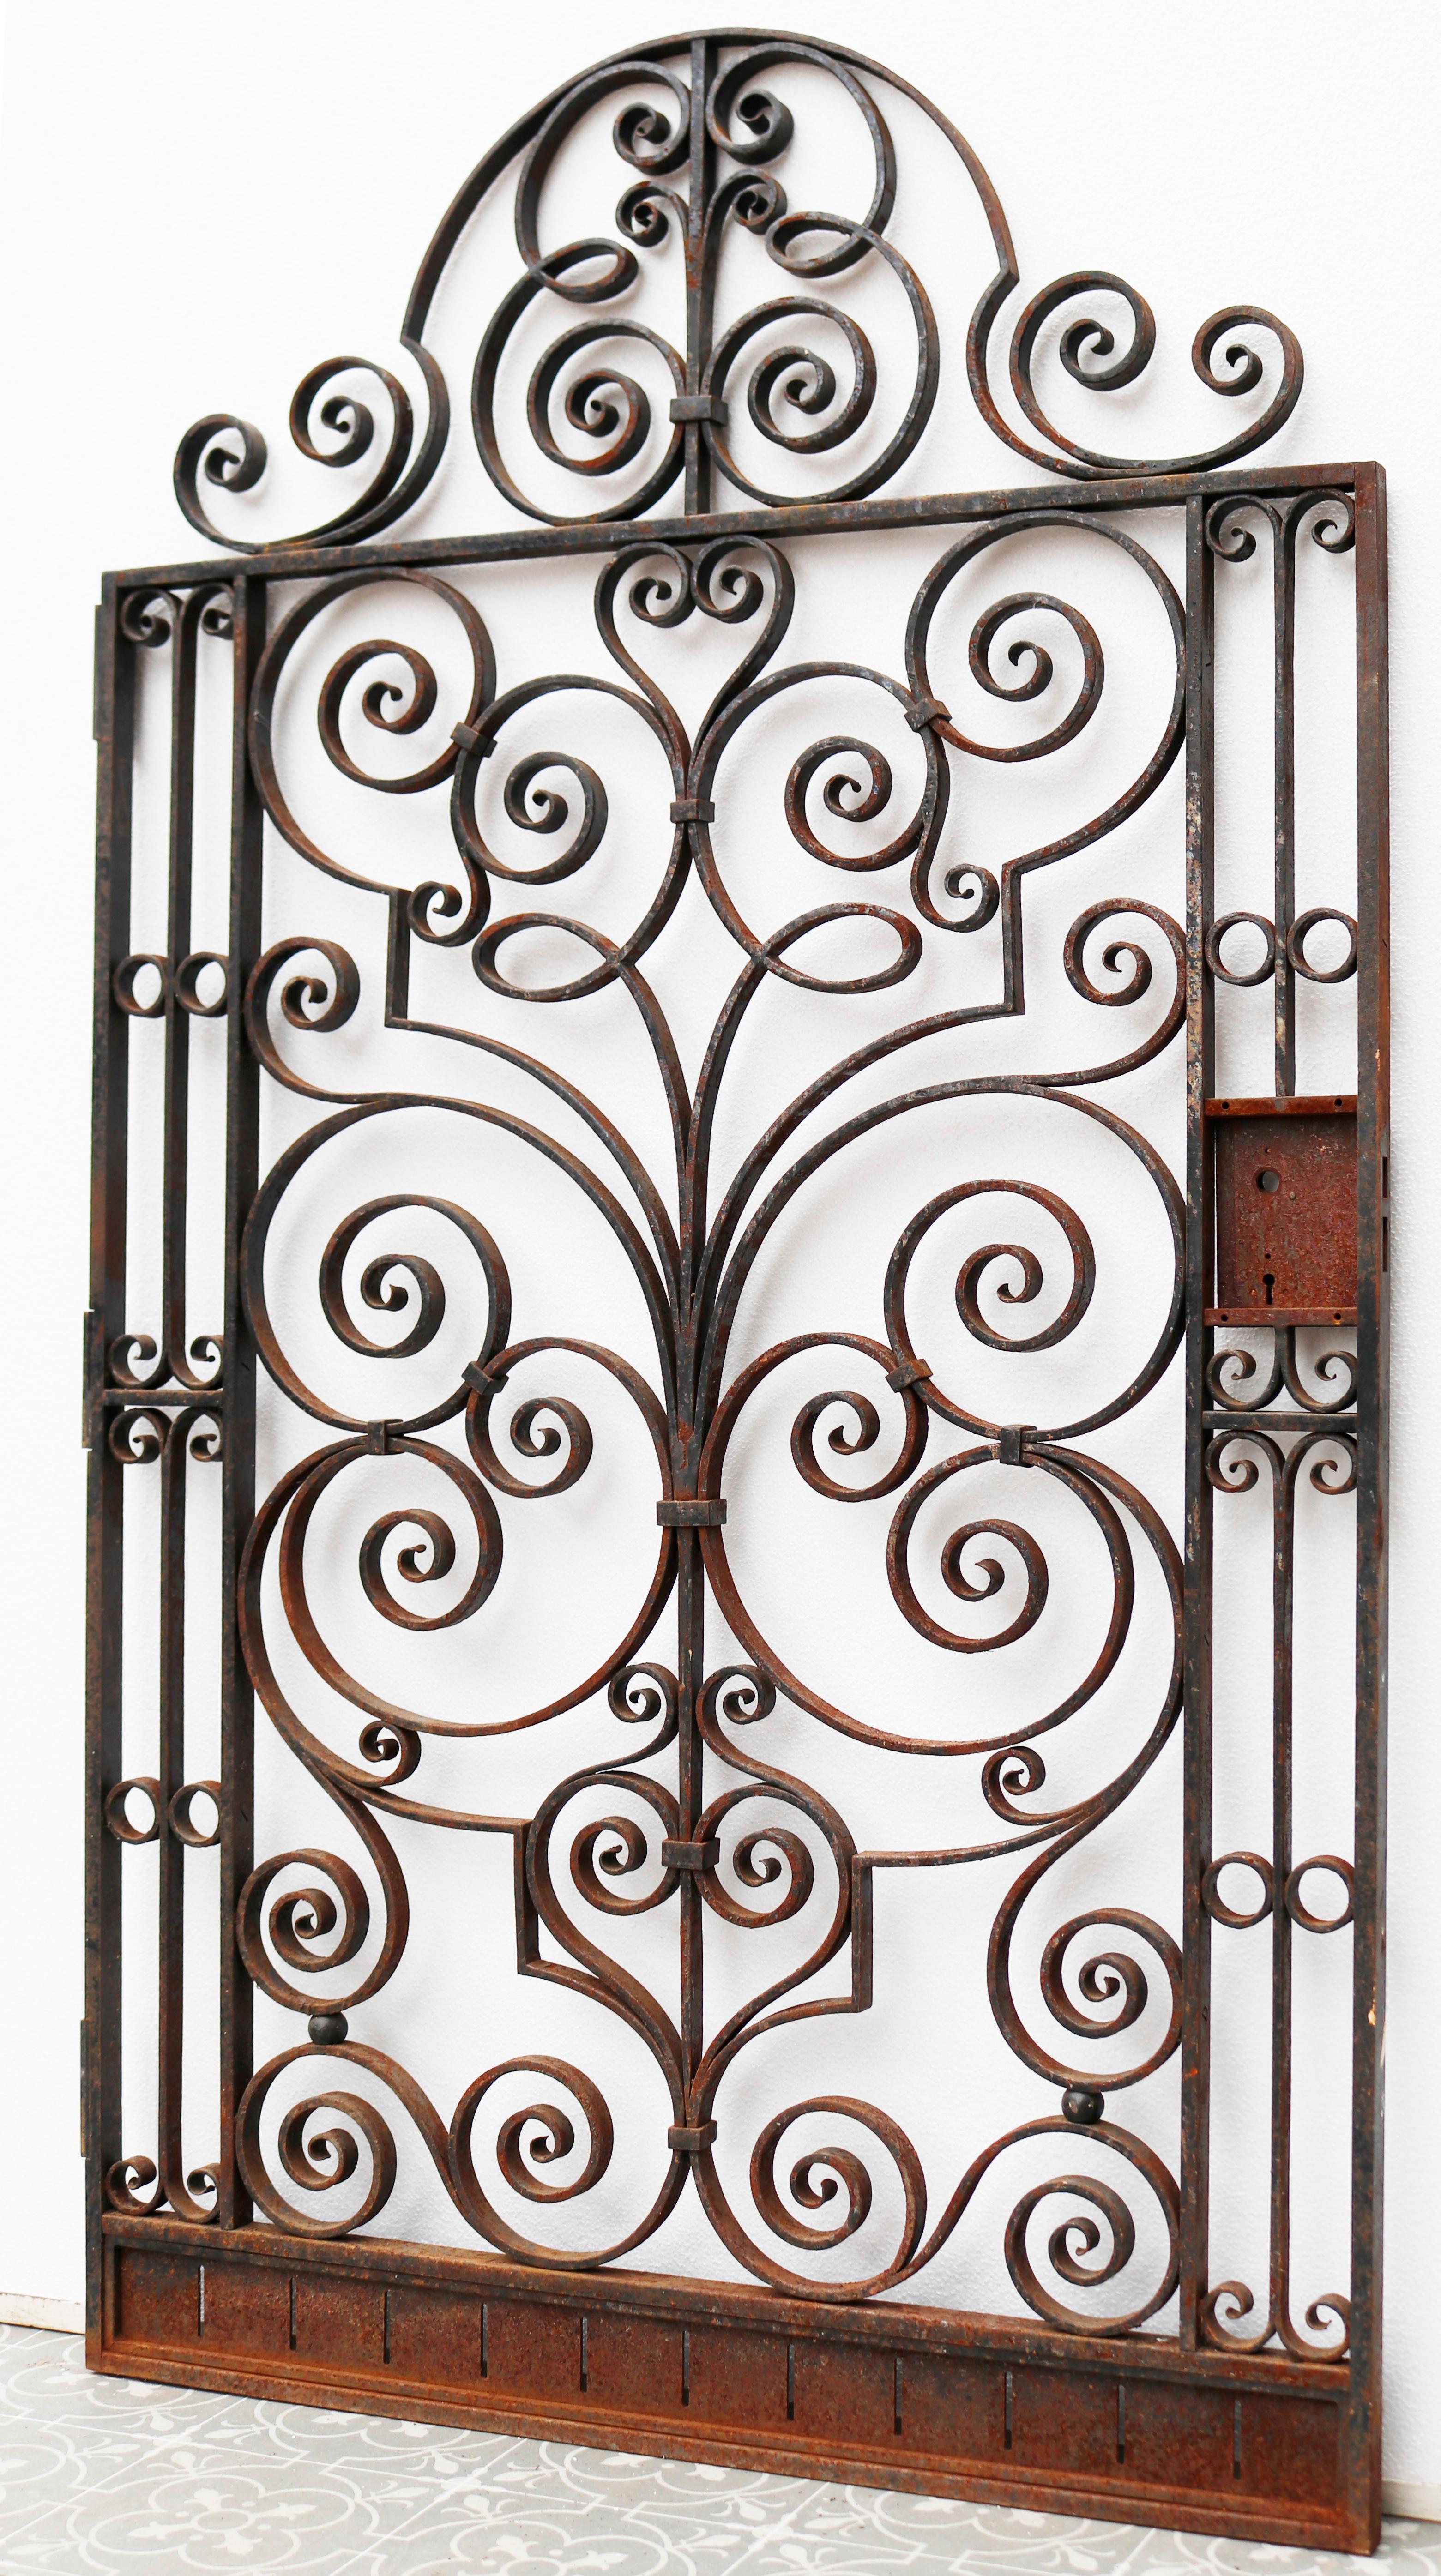 Antique Wrought Iron Pedestrian Gate In Good Condition For Sale In Wormelow, Herefordshire